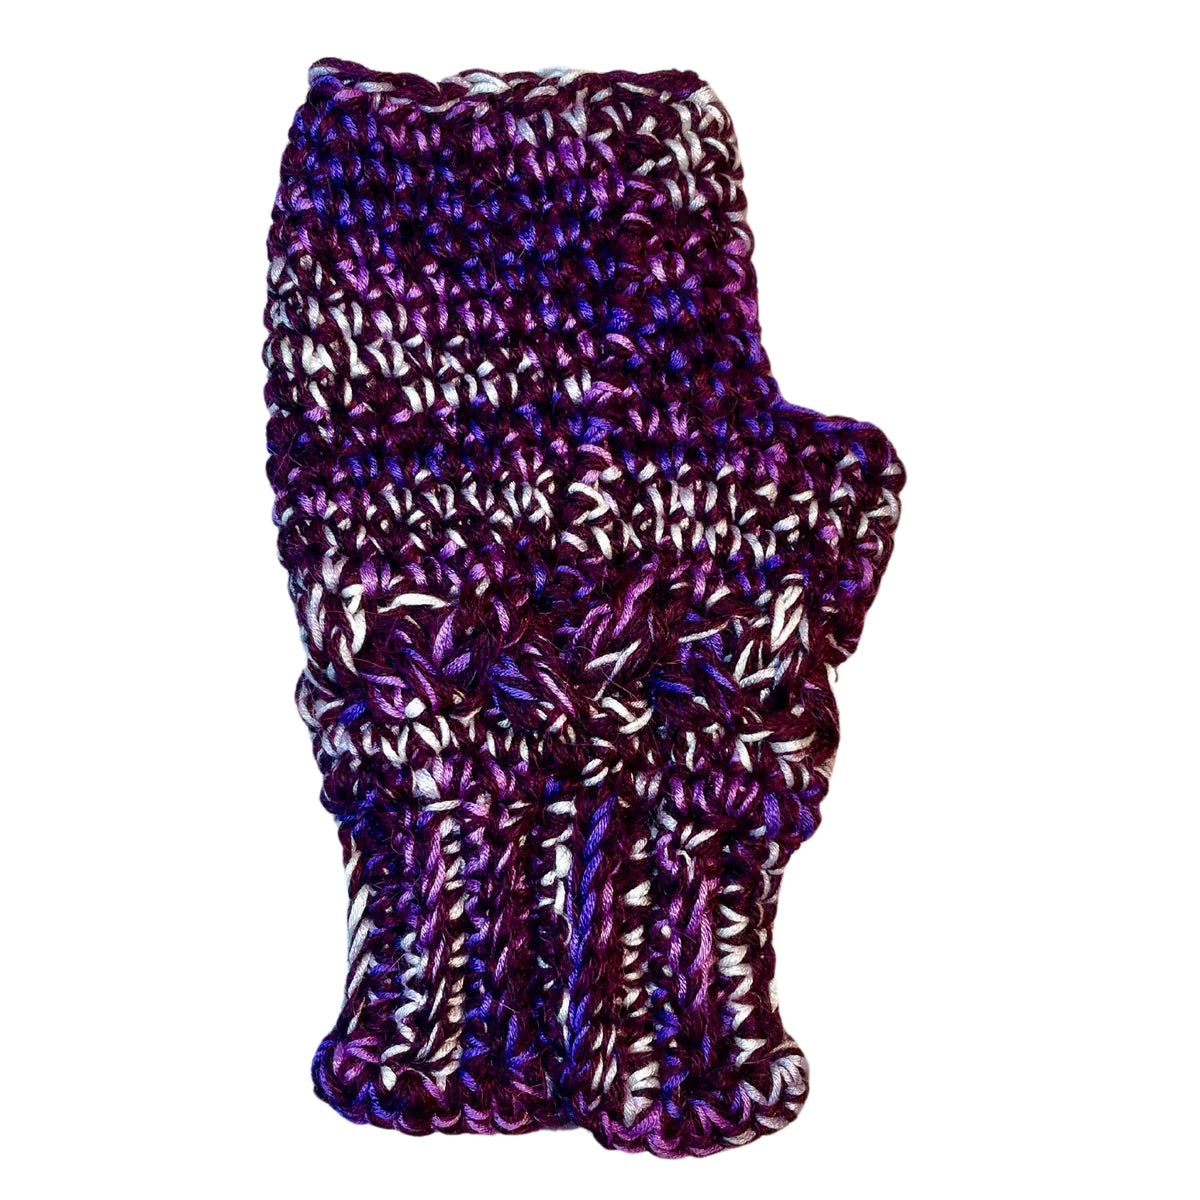 Alpacas of Montana deep purple, bright purple violet, and white colored cozy soft warm handmade knitted crochet fingerless celtic wristie mittens made in Montana out of alpaca yarn and bamboo yarn.